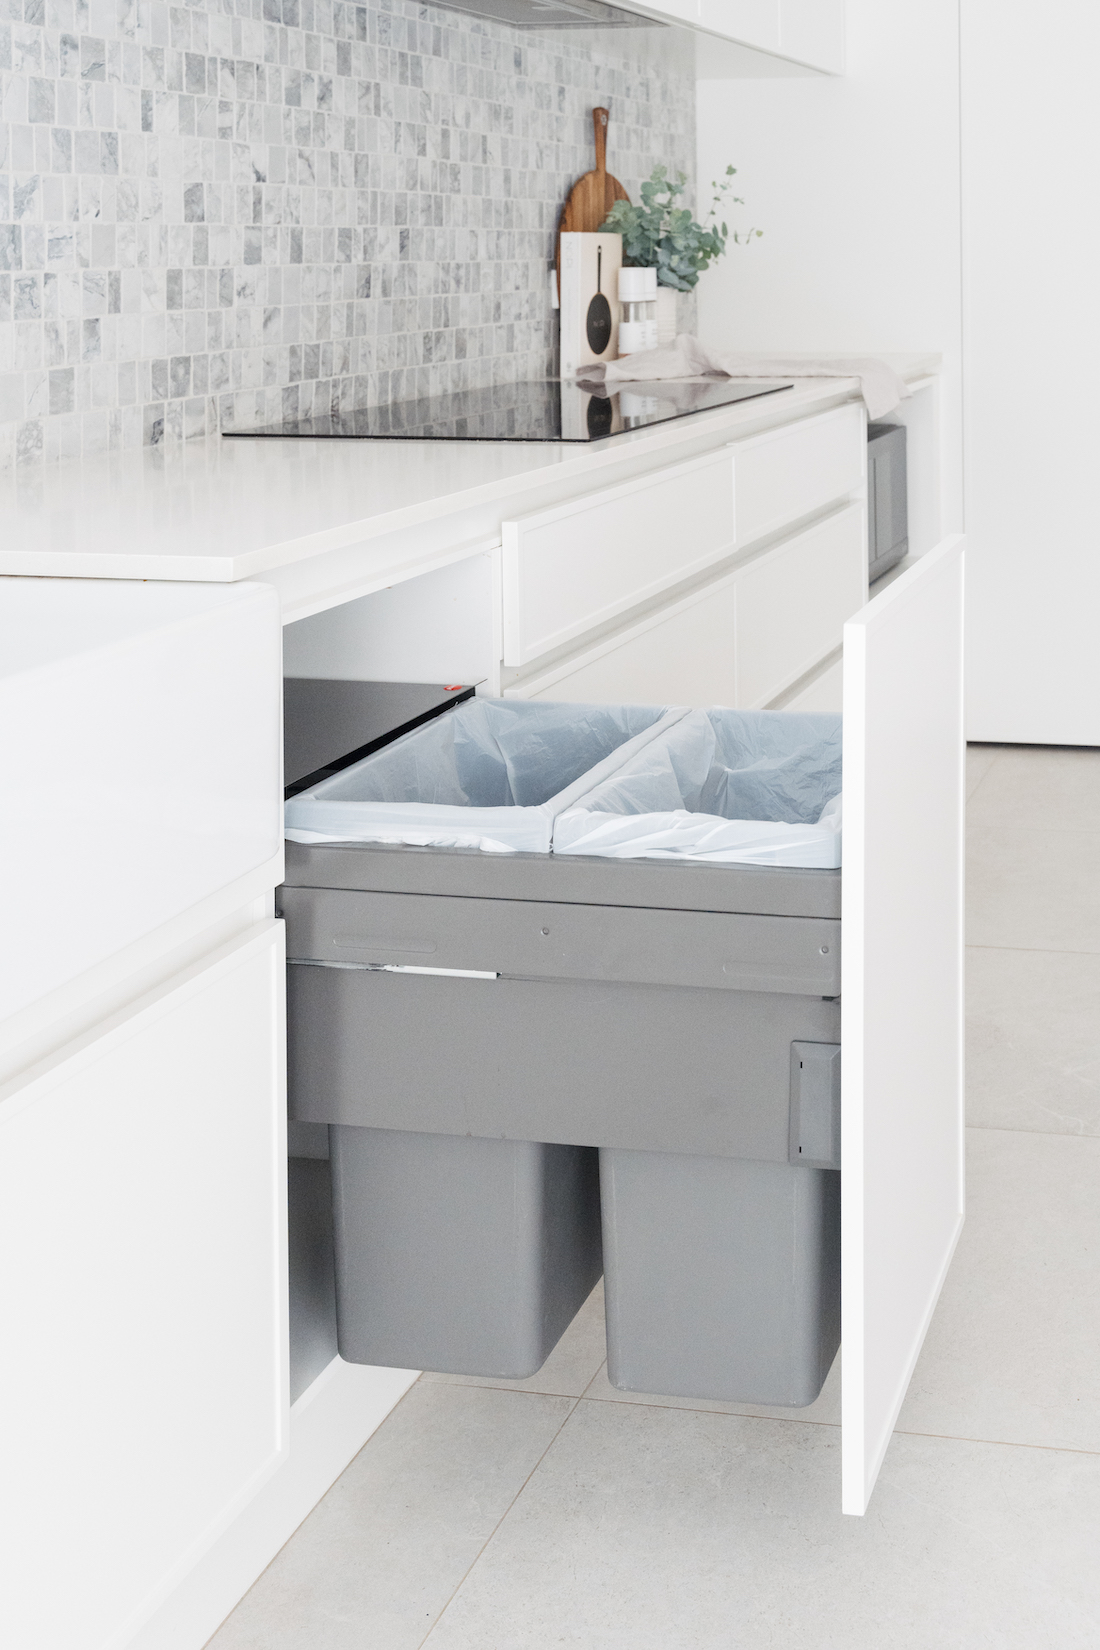 Large pull out bin in kitchen